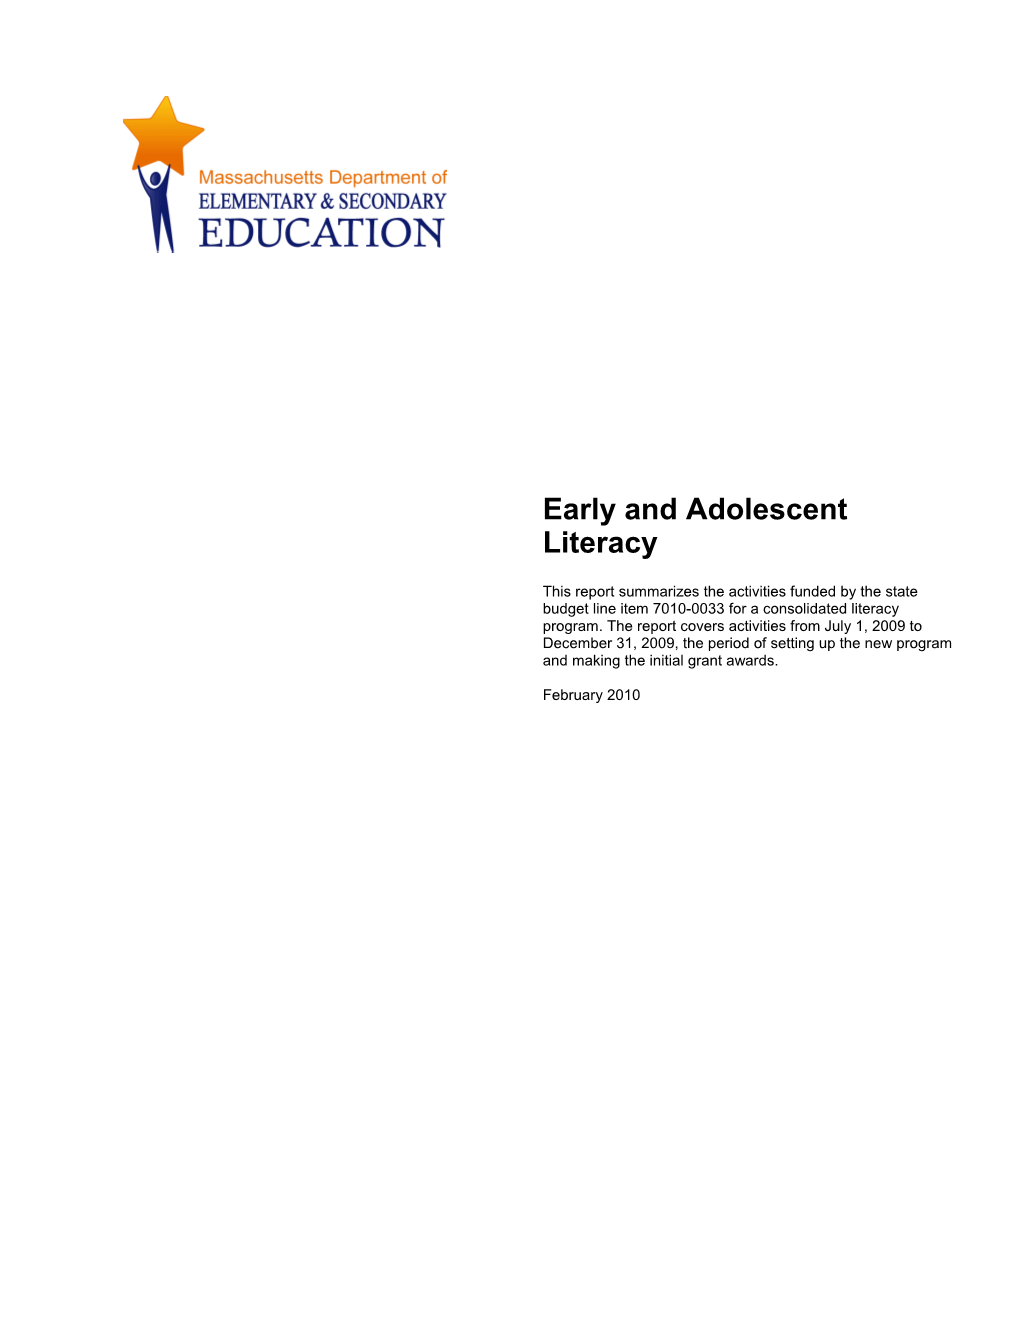 Early and Adolescent Literacy Legislative Report FY10